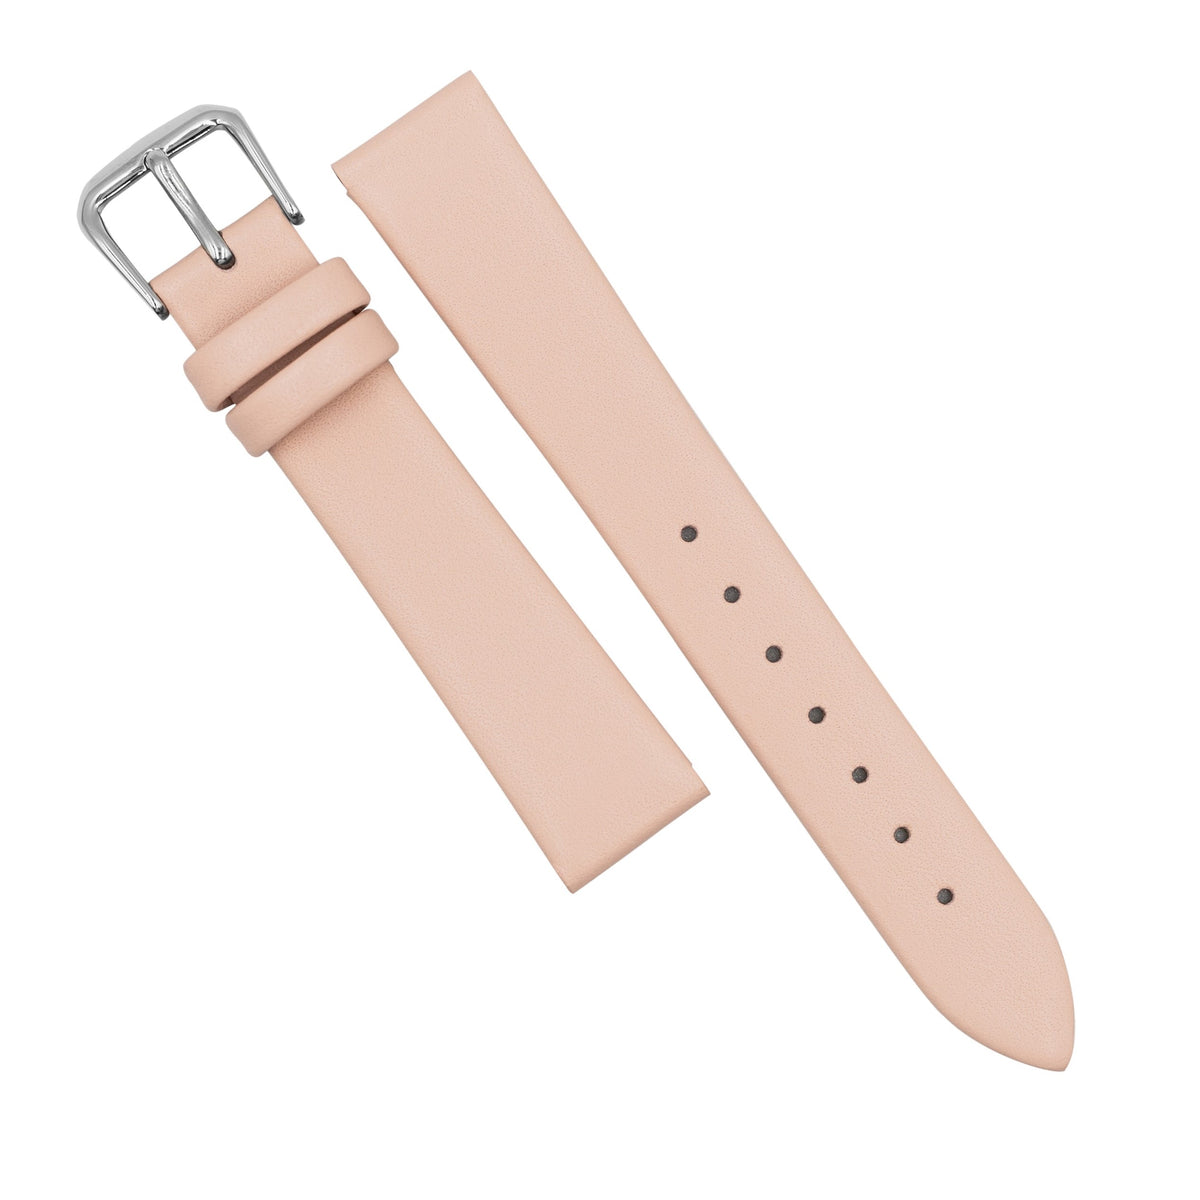 Unstitched Smooth Leather Watch Strap in Pink (12mm) - Nomad Watch Works MY